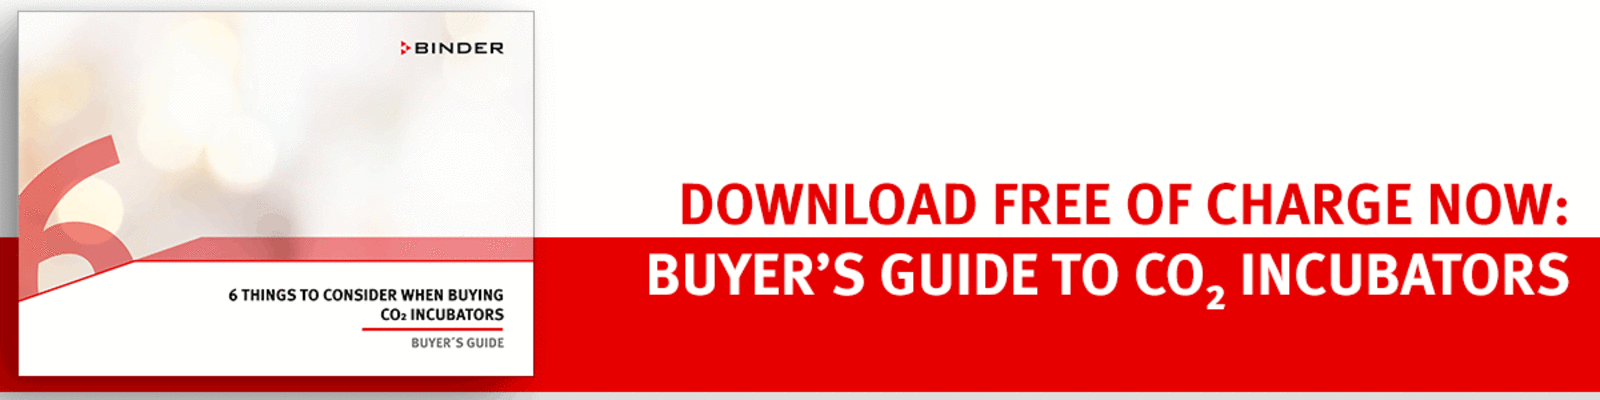 Download free of charge now - Buyer's Guide to CO2 incubators